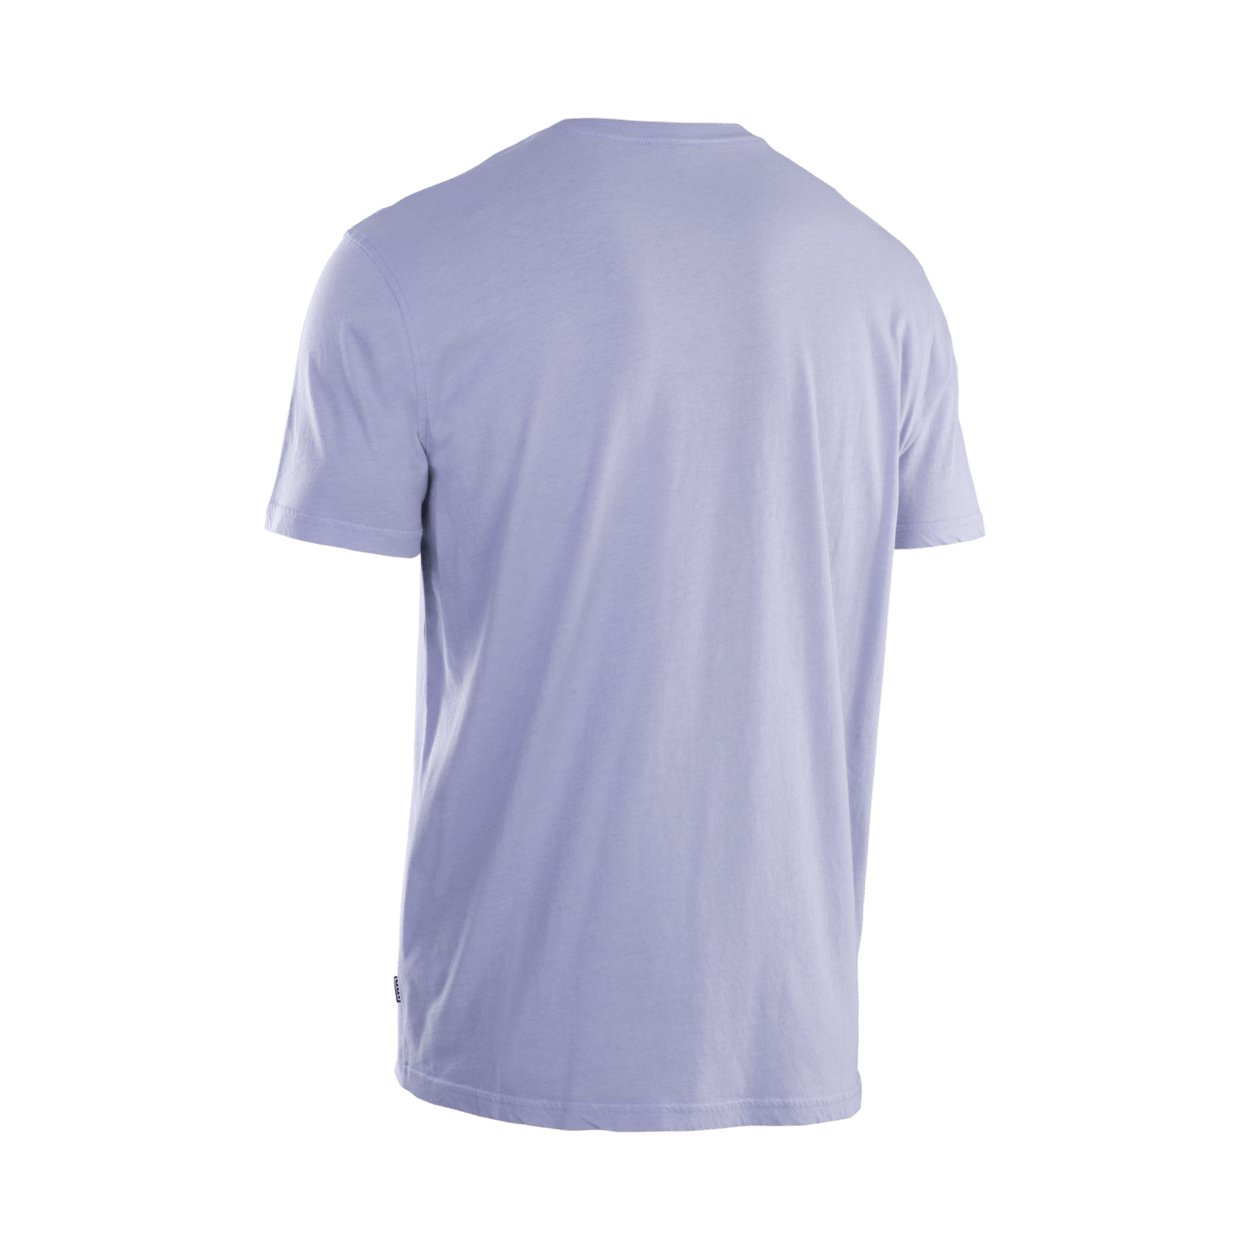 ION Tee Addicted SS men 2023 - Worthing Watersports - 9010583102368 - Apparel - ION Bike